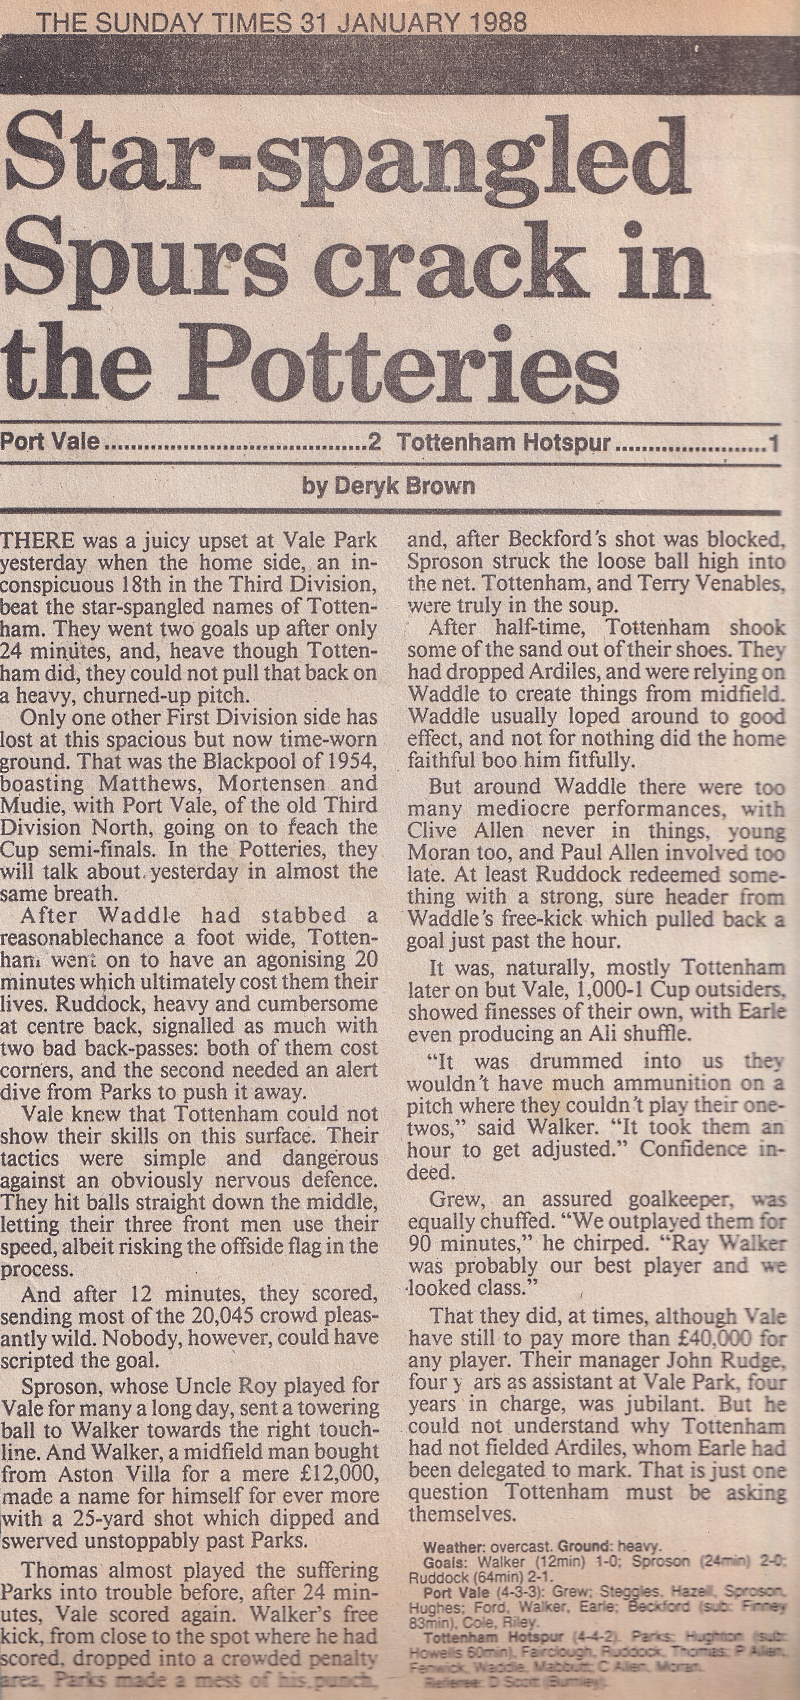 Sunday Times report on Port Vale 2-1 Spurs 1988